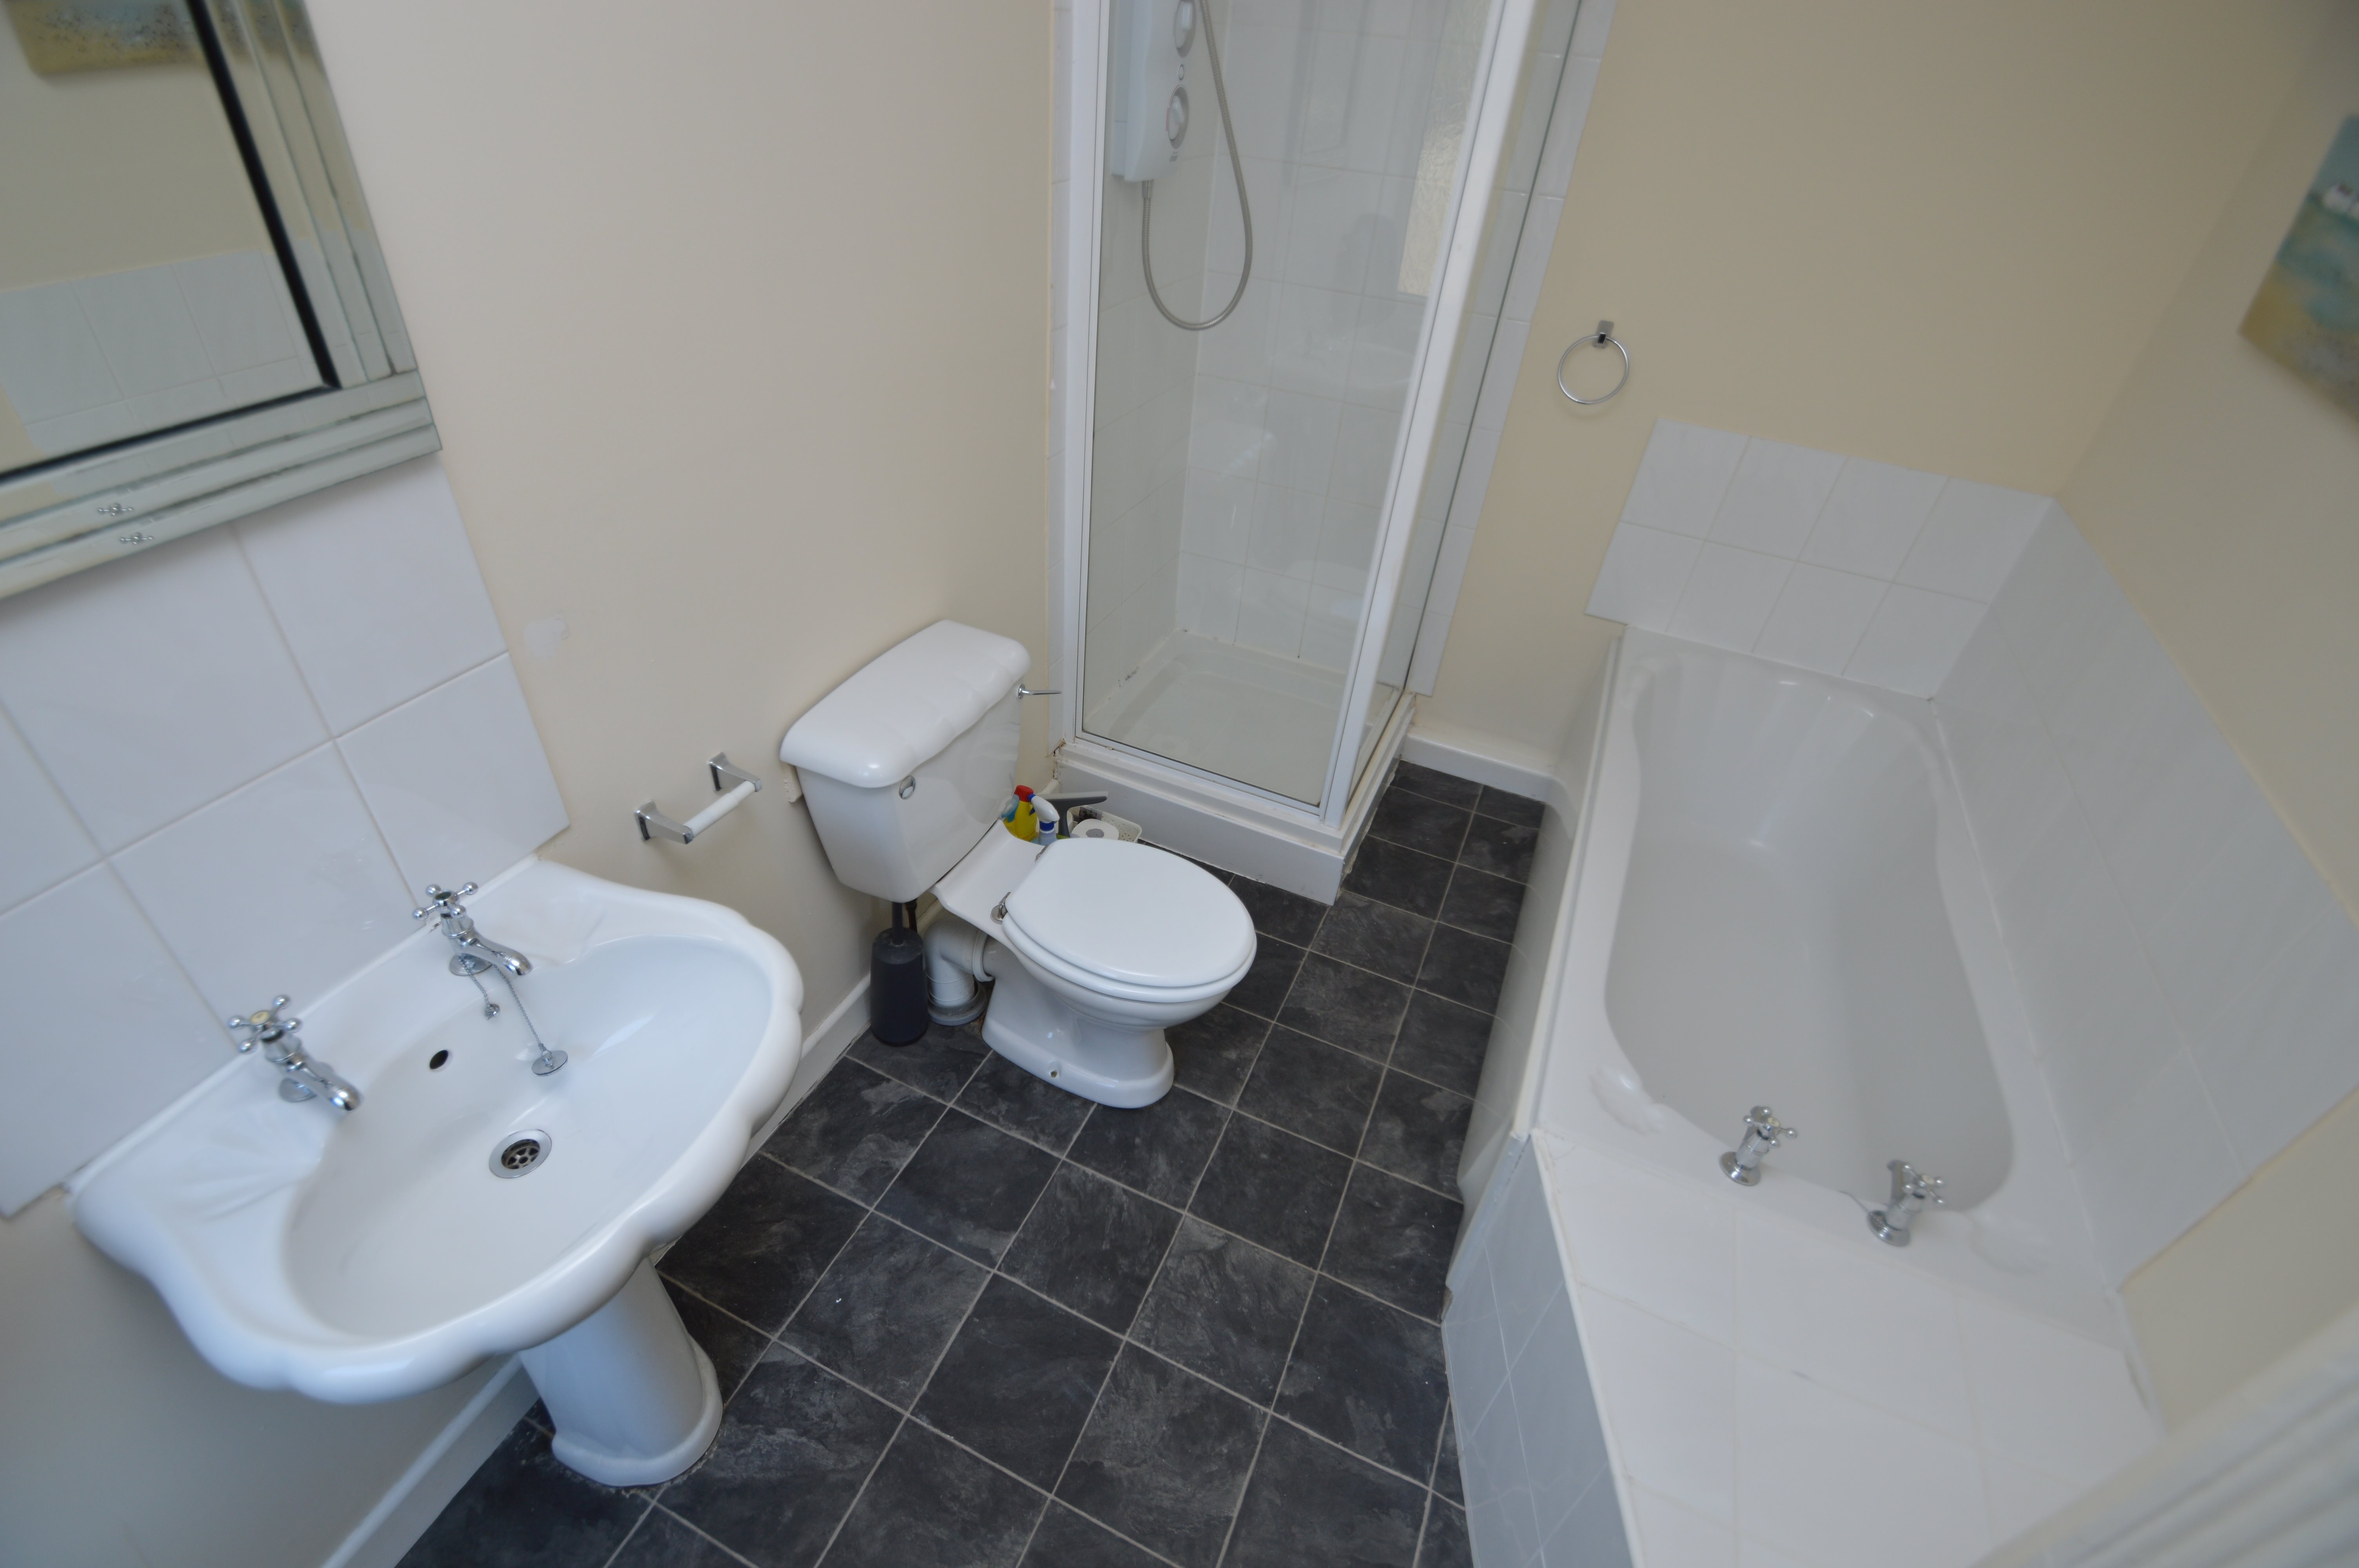 1 bed house / flat share to rent in Wood Road , Treforest  8